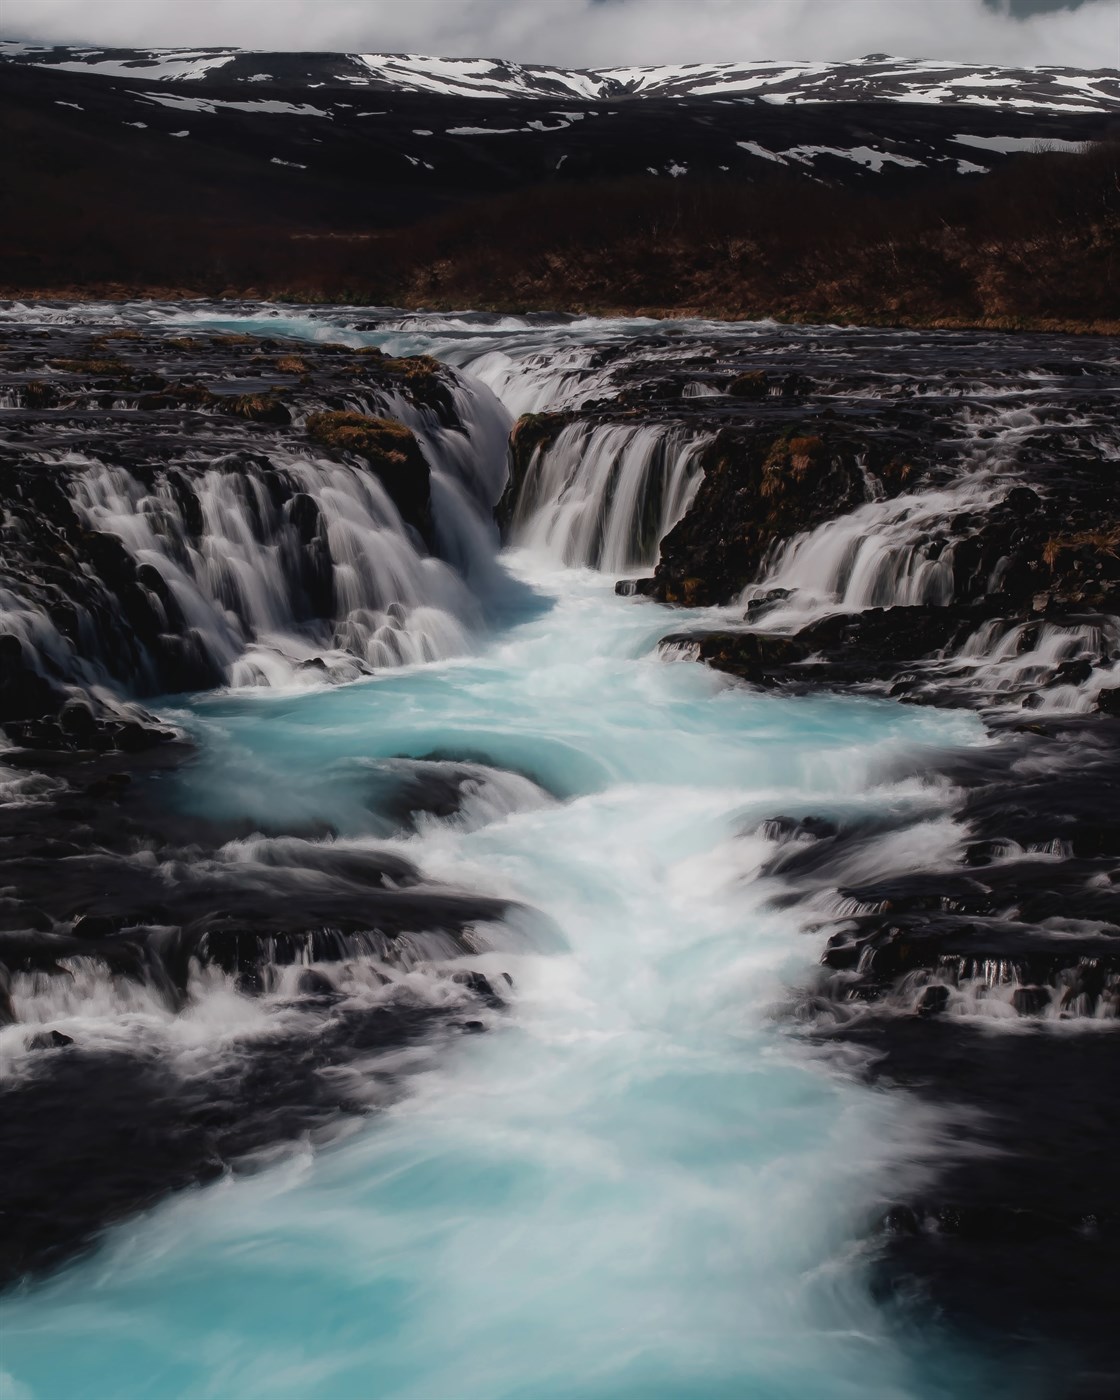 Bruarfoss waterfall in South Iceland